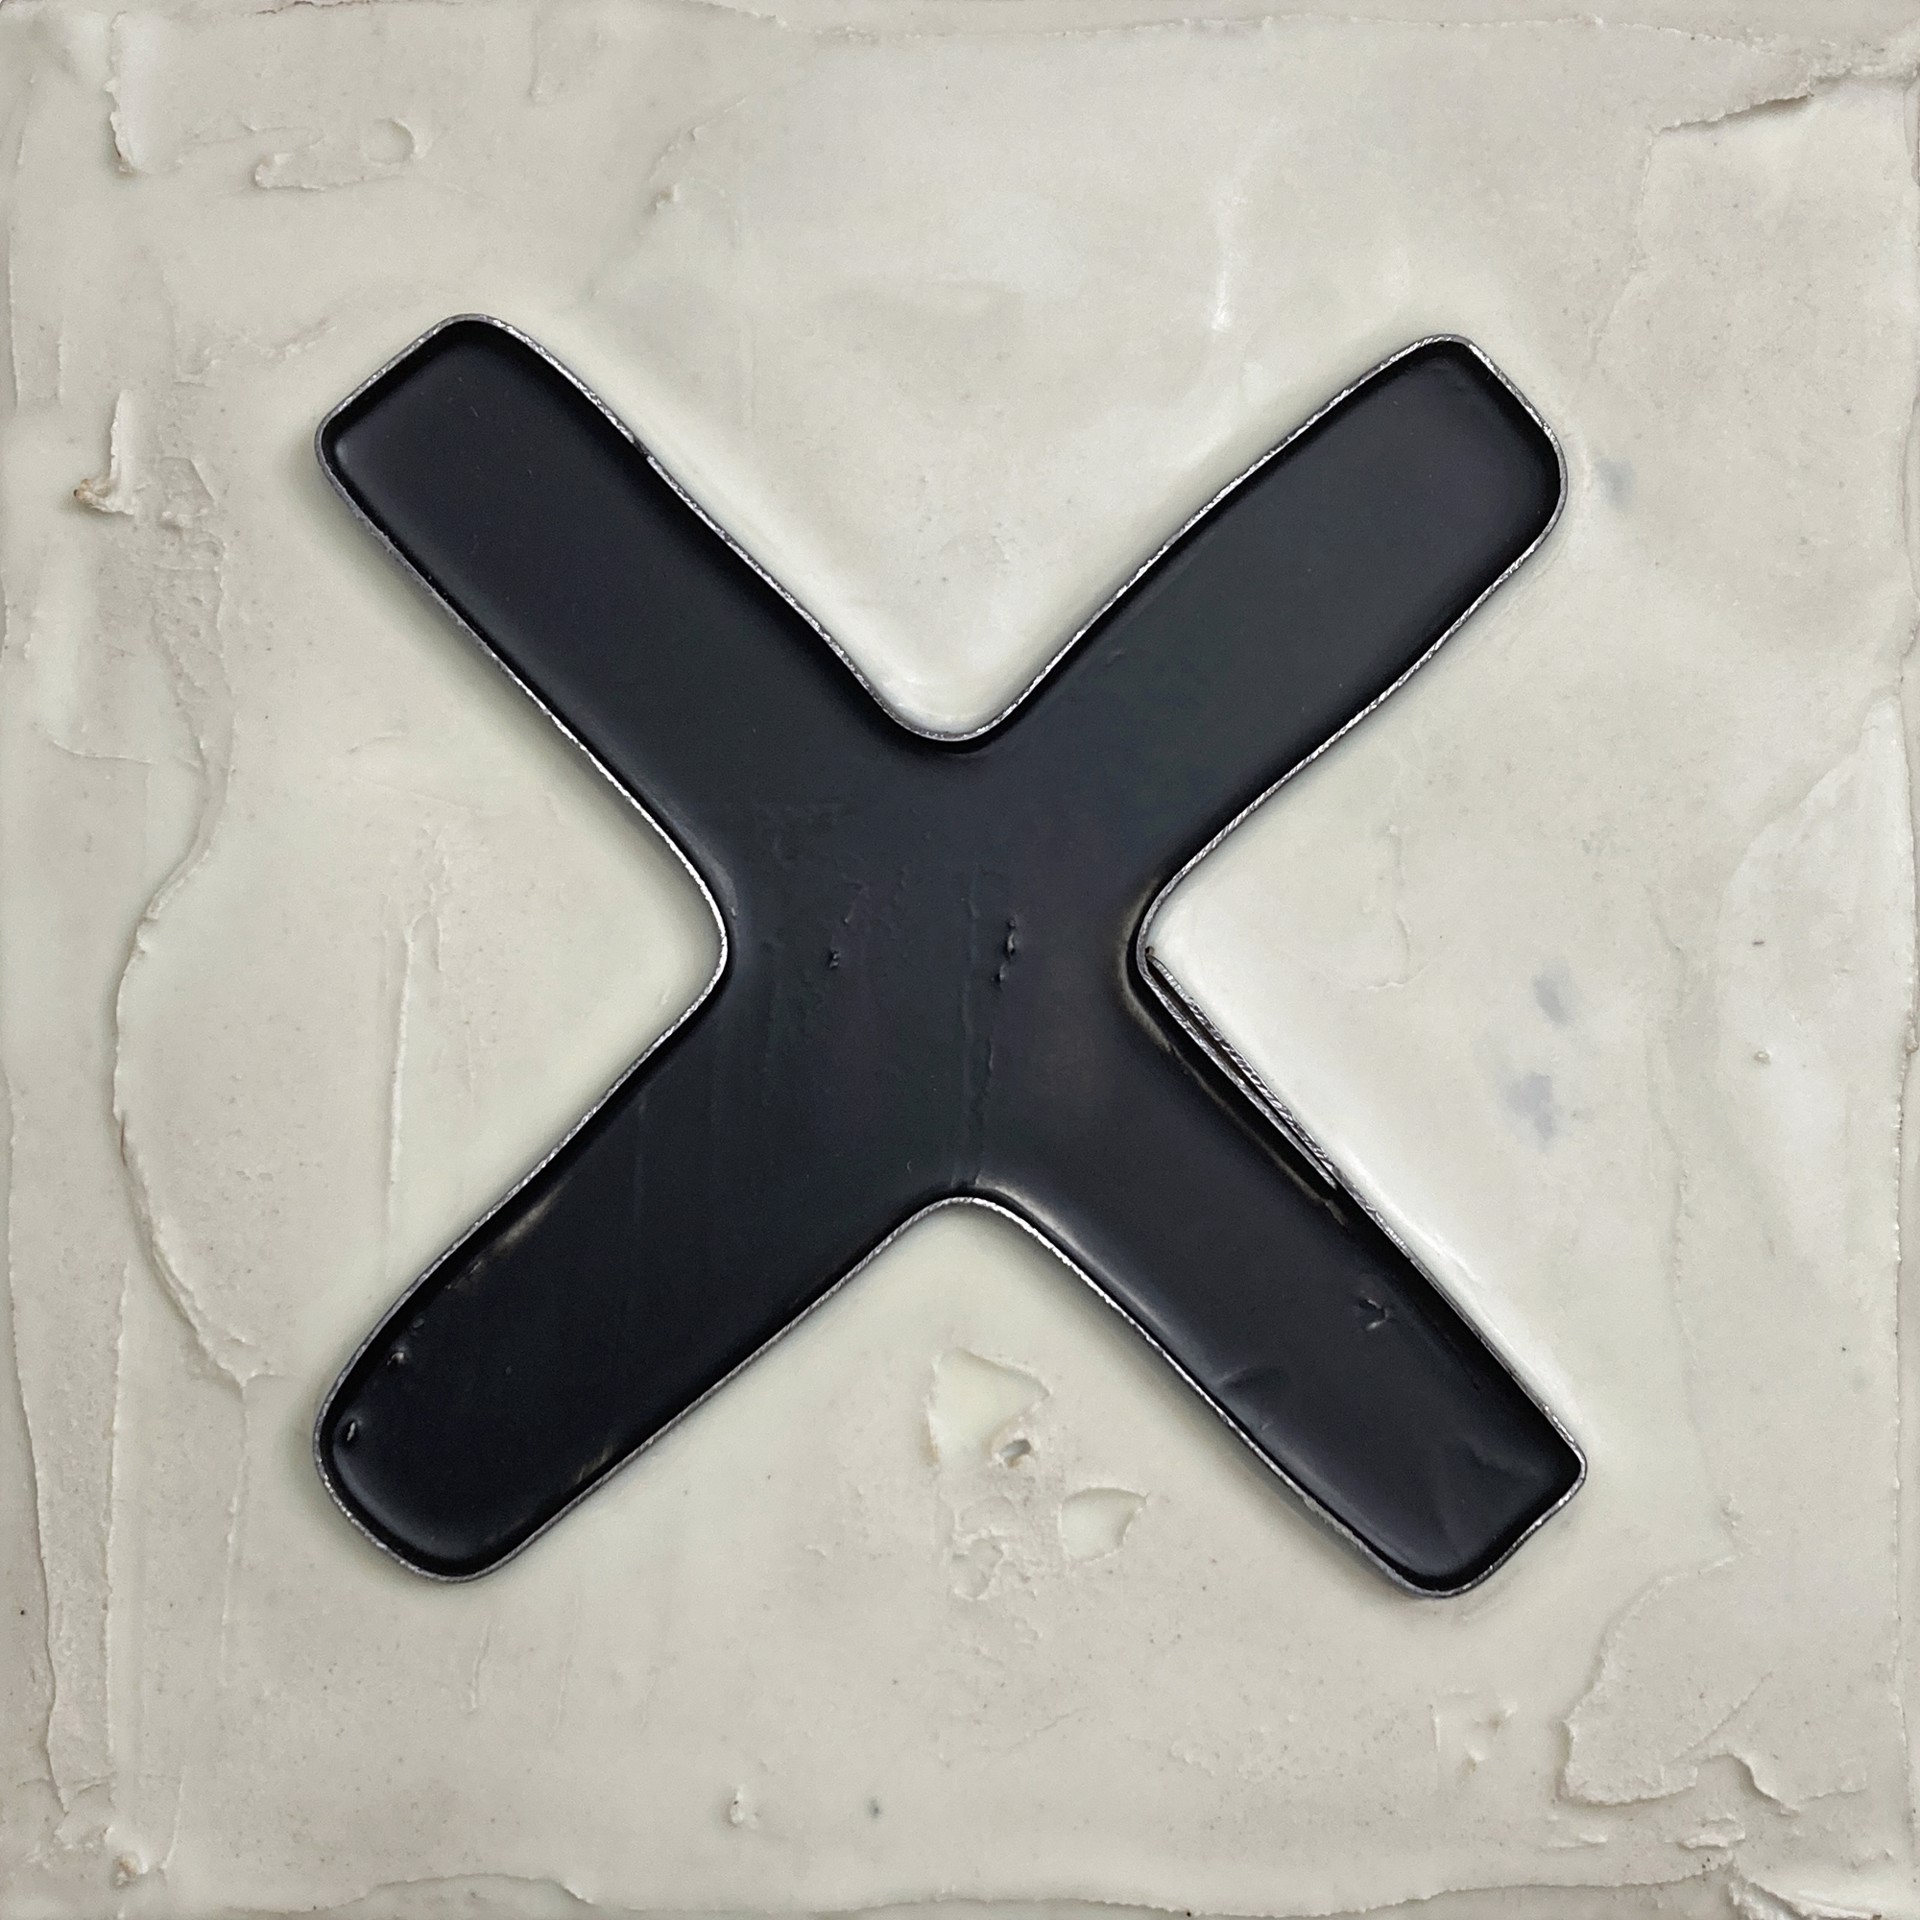 It's Always The X's 1 by Scott Connelly